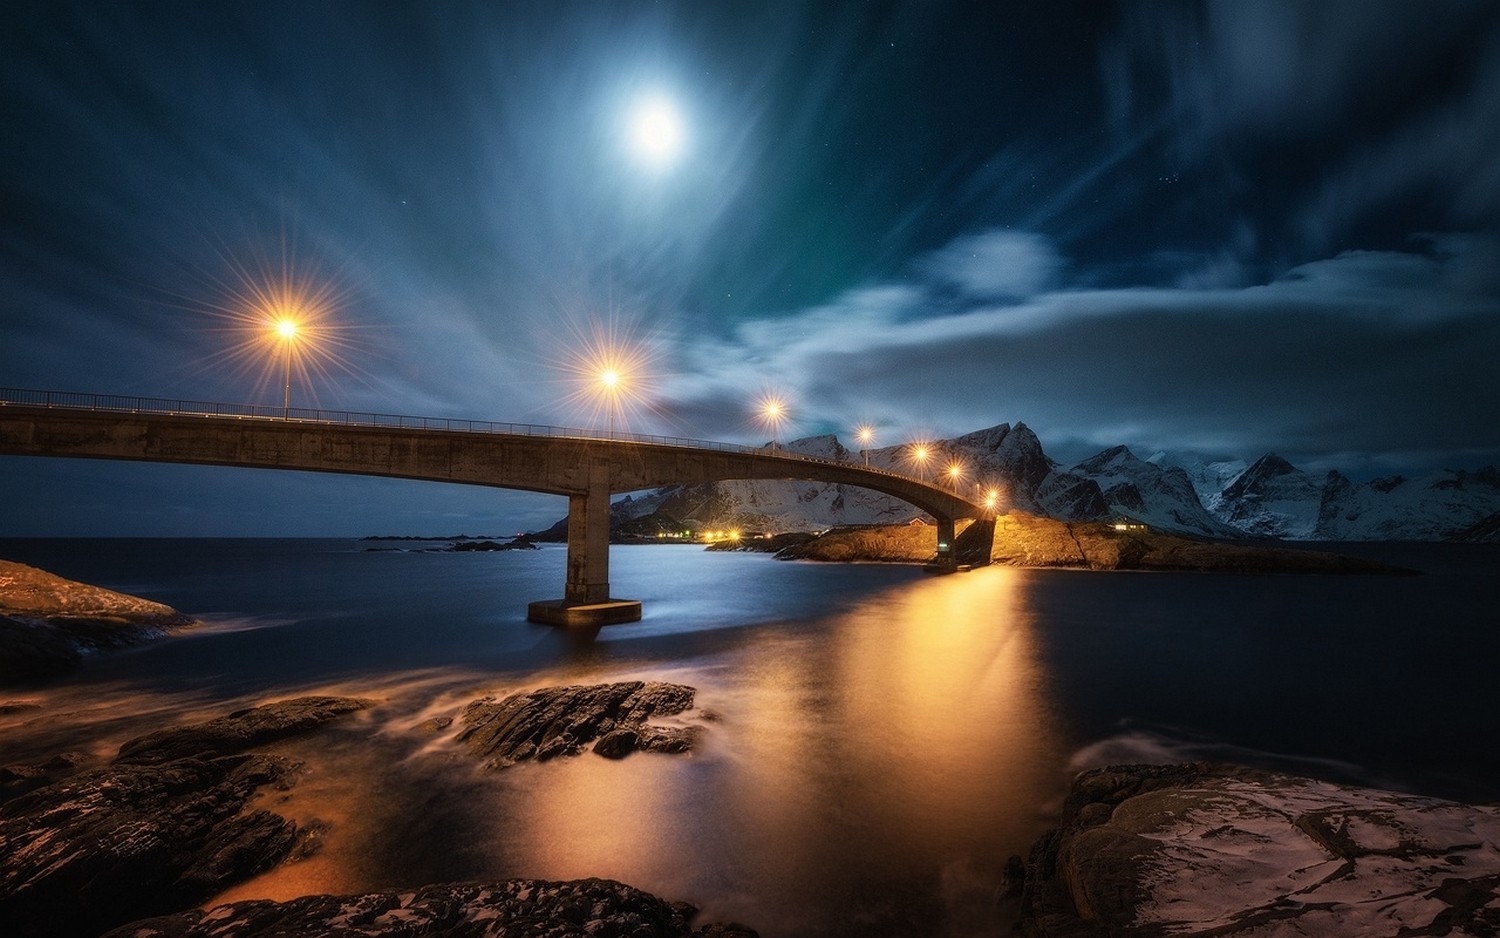 General 1500x938 nature landscape night bridge lights Moon clouds mountains island snow Norway fjord sea rocks water nordic landscapes snowy mountain